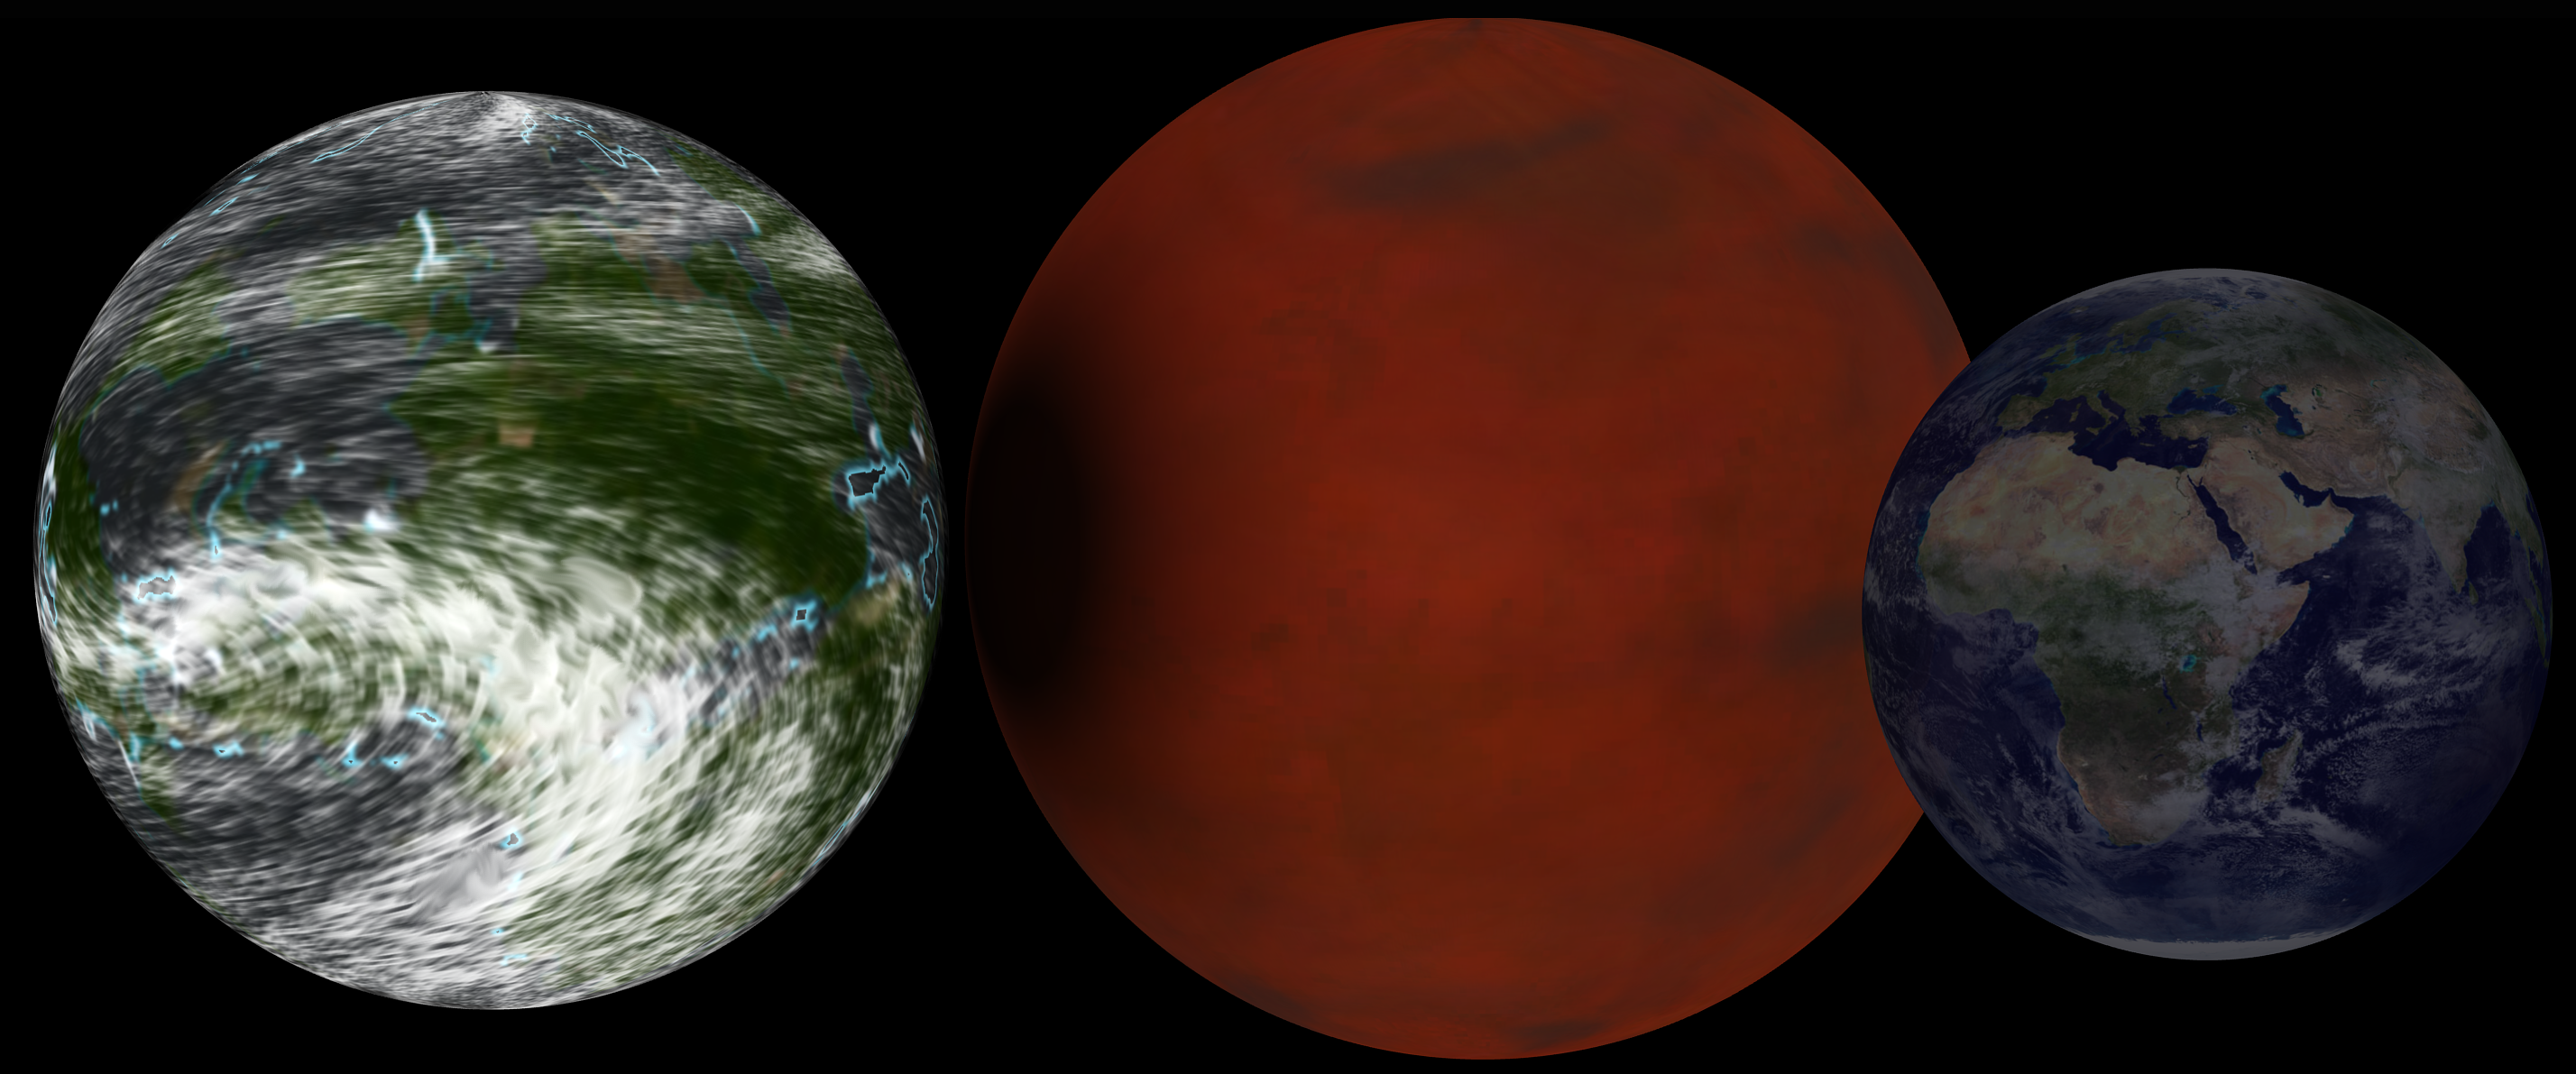 Hypothetical super earth next to Earth for comparison.